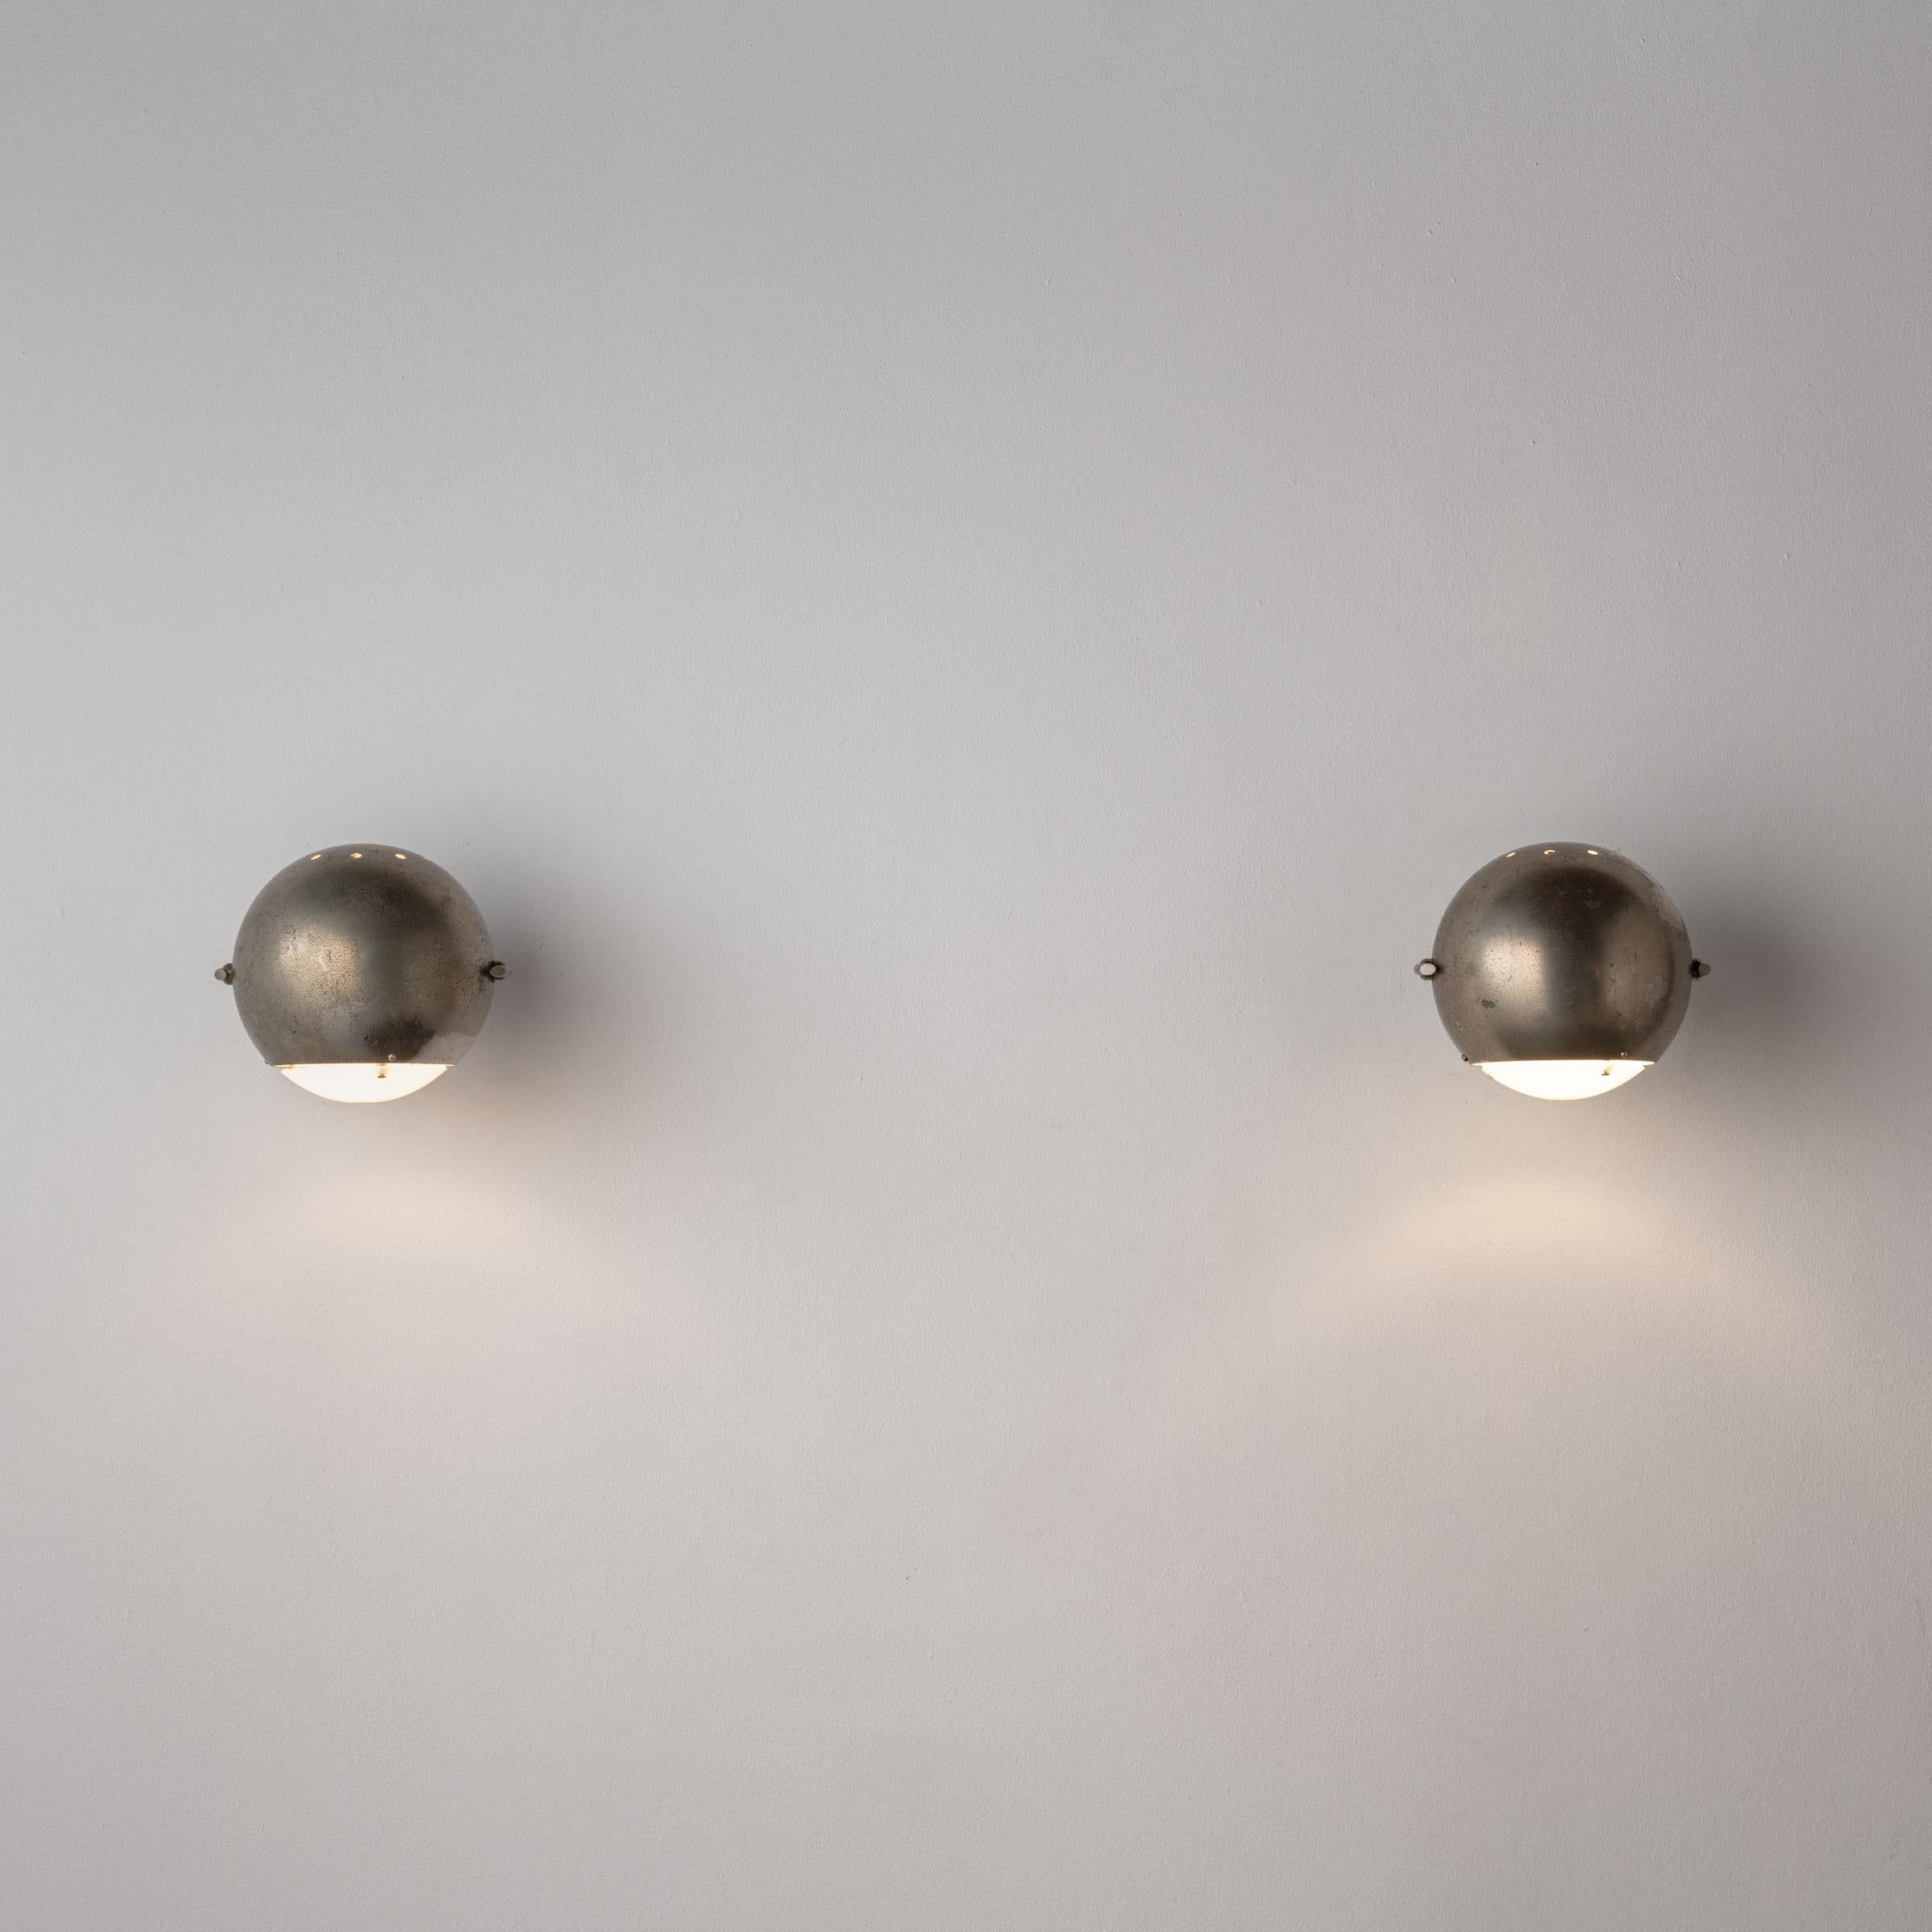 Pair of Sconces by Angelo Lelli. Designed and manufactured in Italy, circa 1950's. Nickel, glass. Rewired for U.S standards. Adjust left/right. Custom nickel backplate. We recommend one E14 60w maximum bulb per fixture. Bulbs not included.